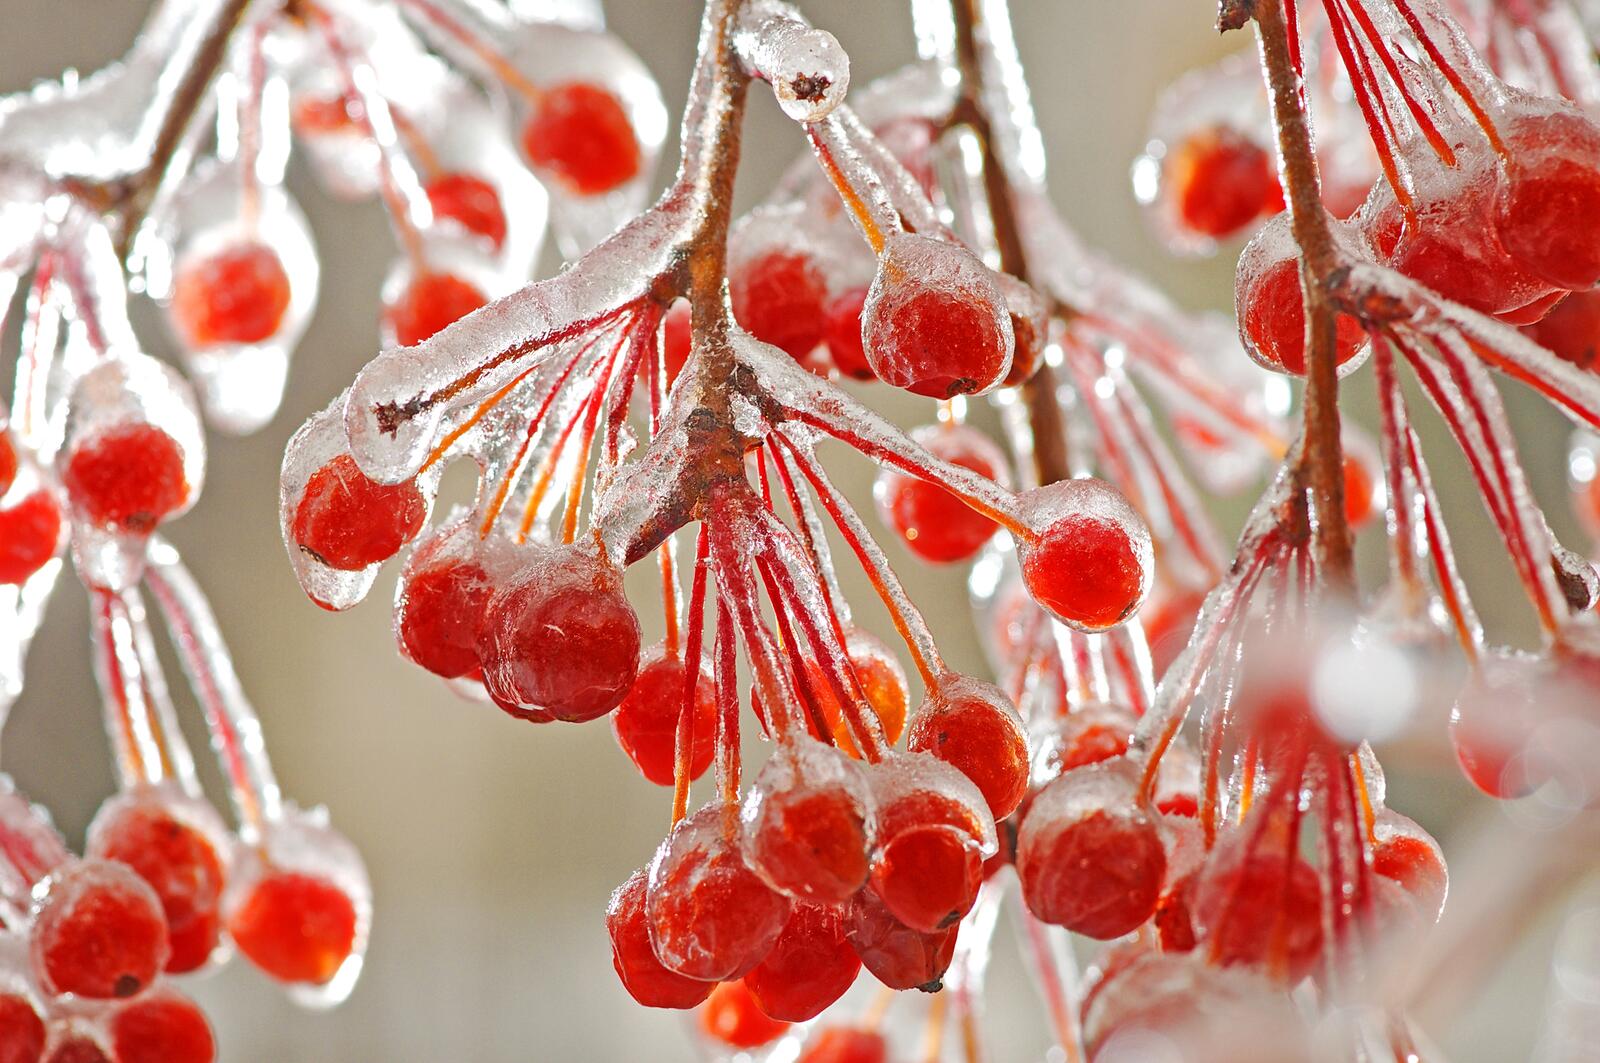 Wallpapers close-up mountain ash ice on the desktop